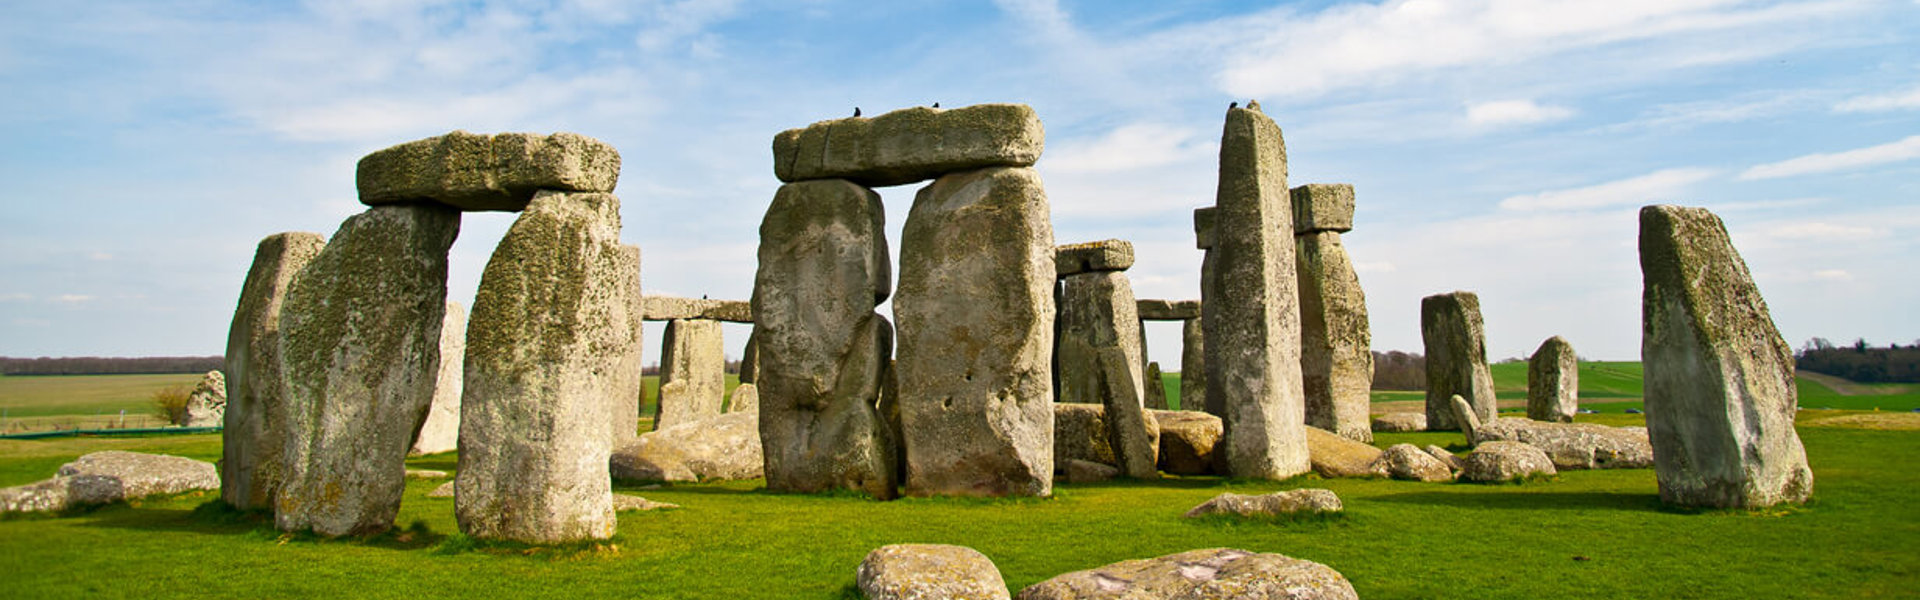 Stonehenge in England on a sunny day